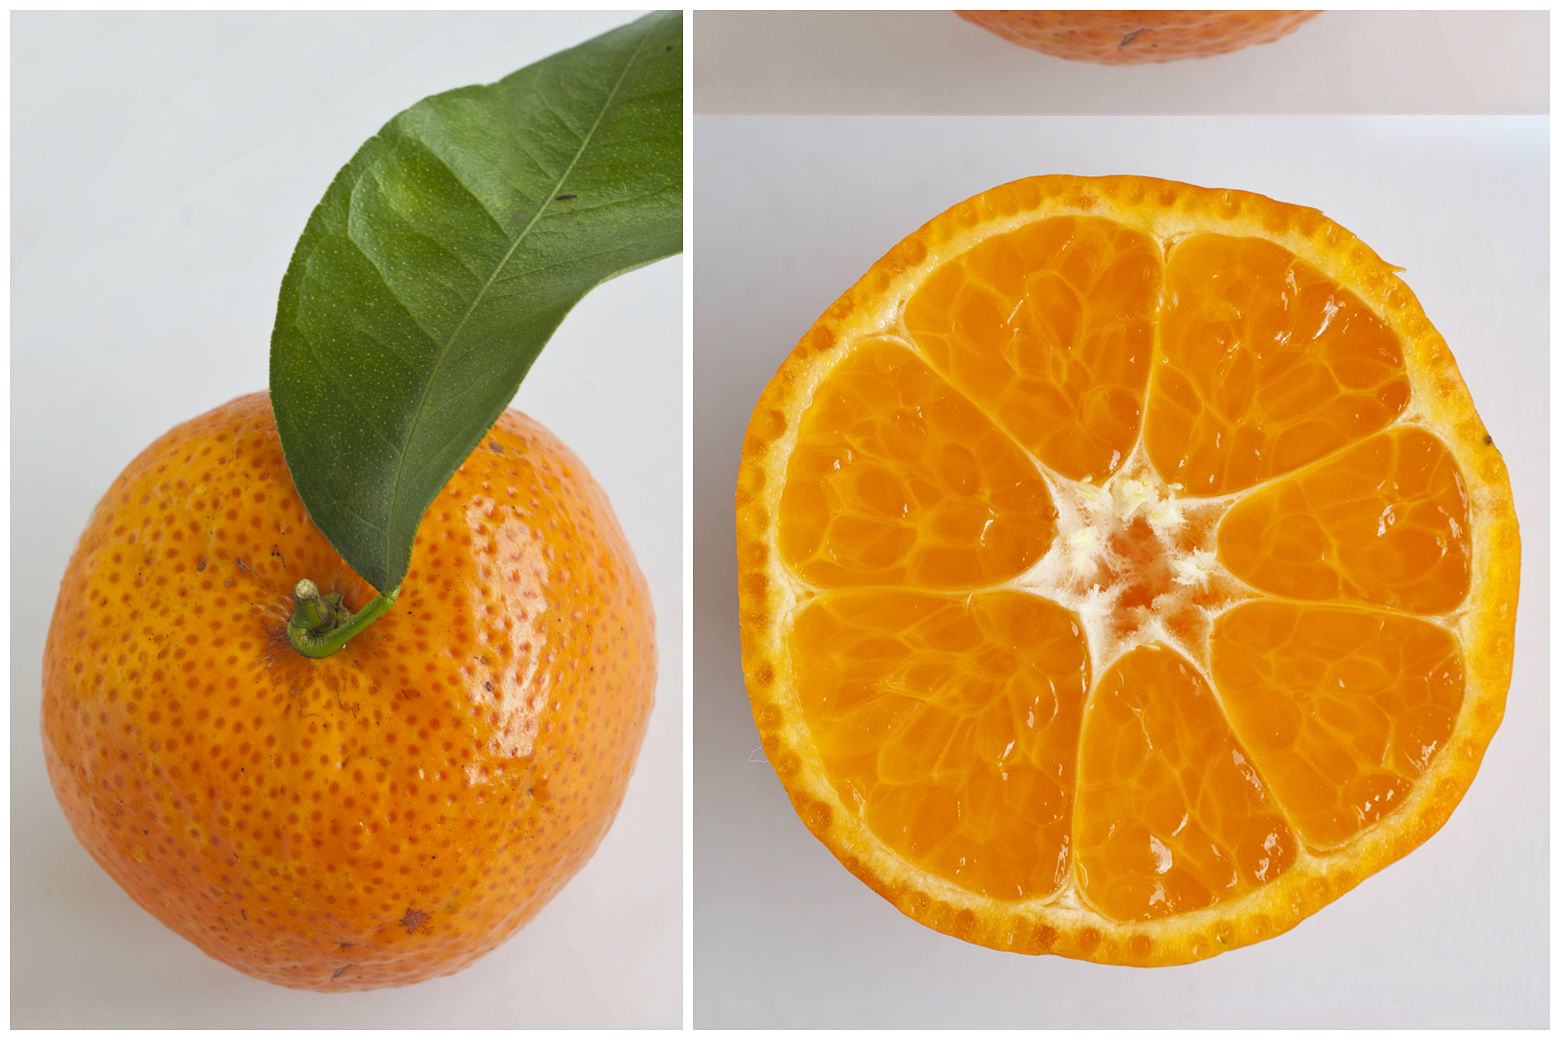 Clementine vs mandarin: what are the differences? - Plantura